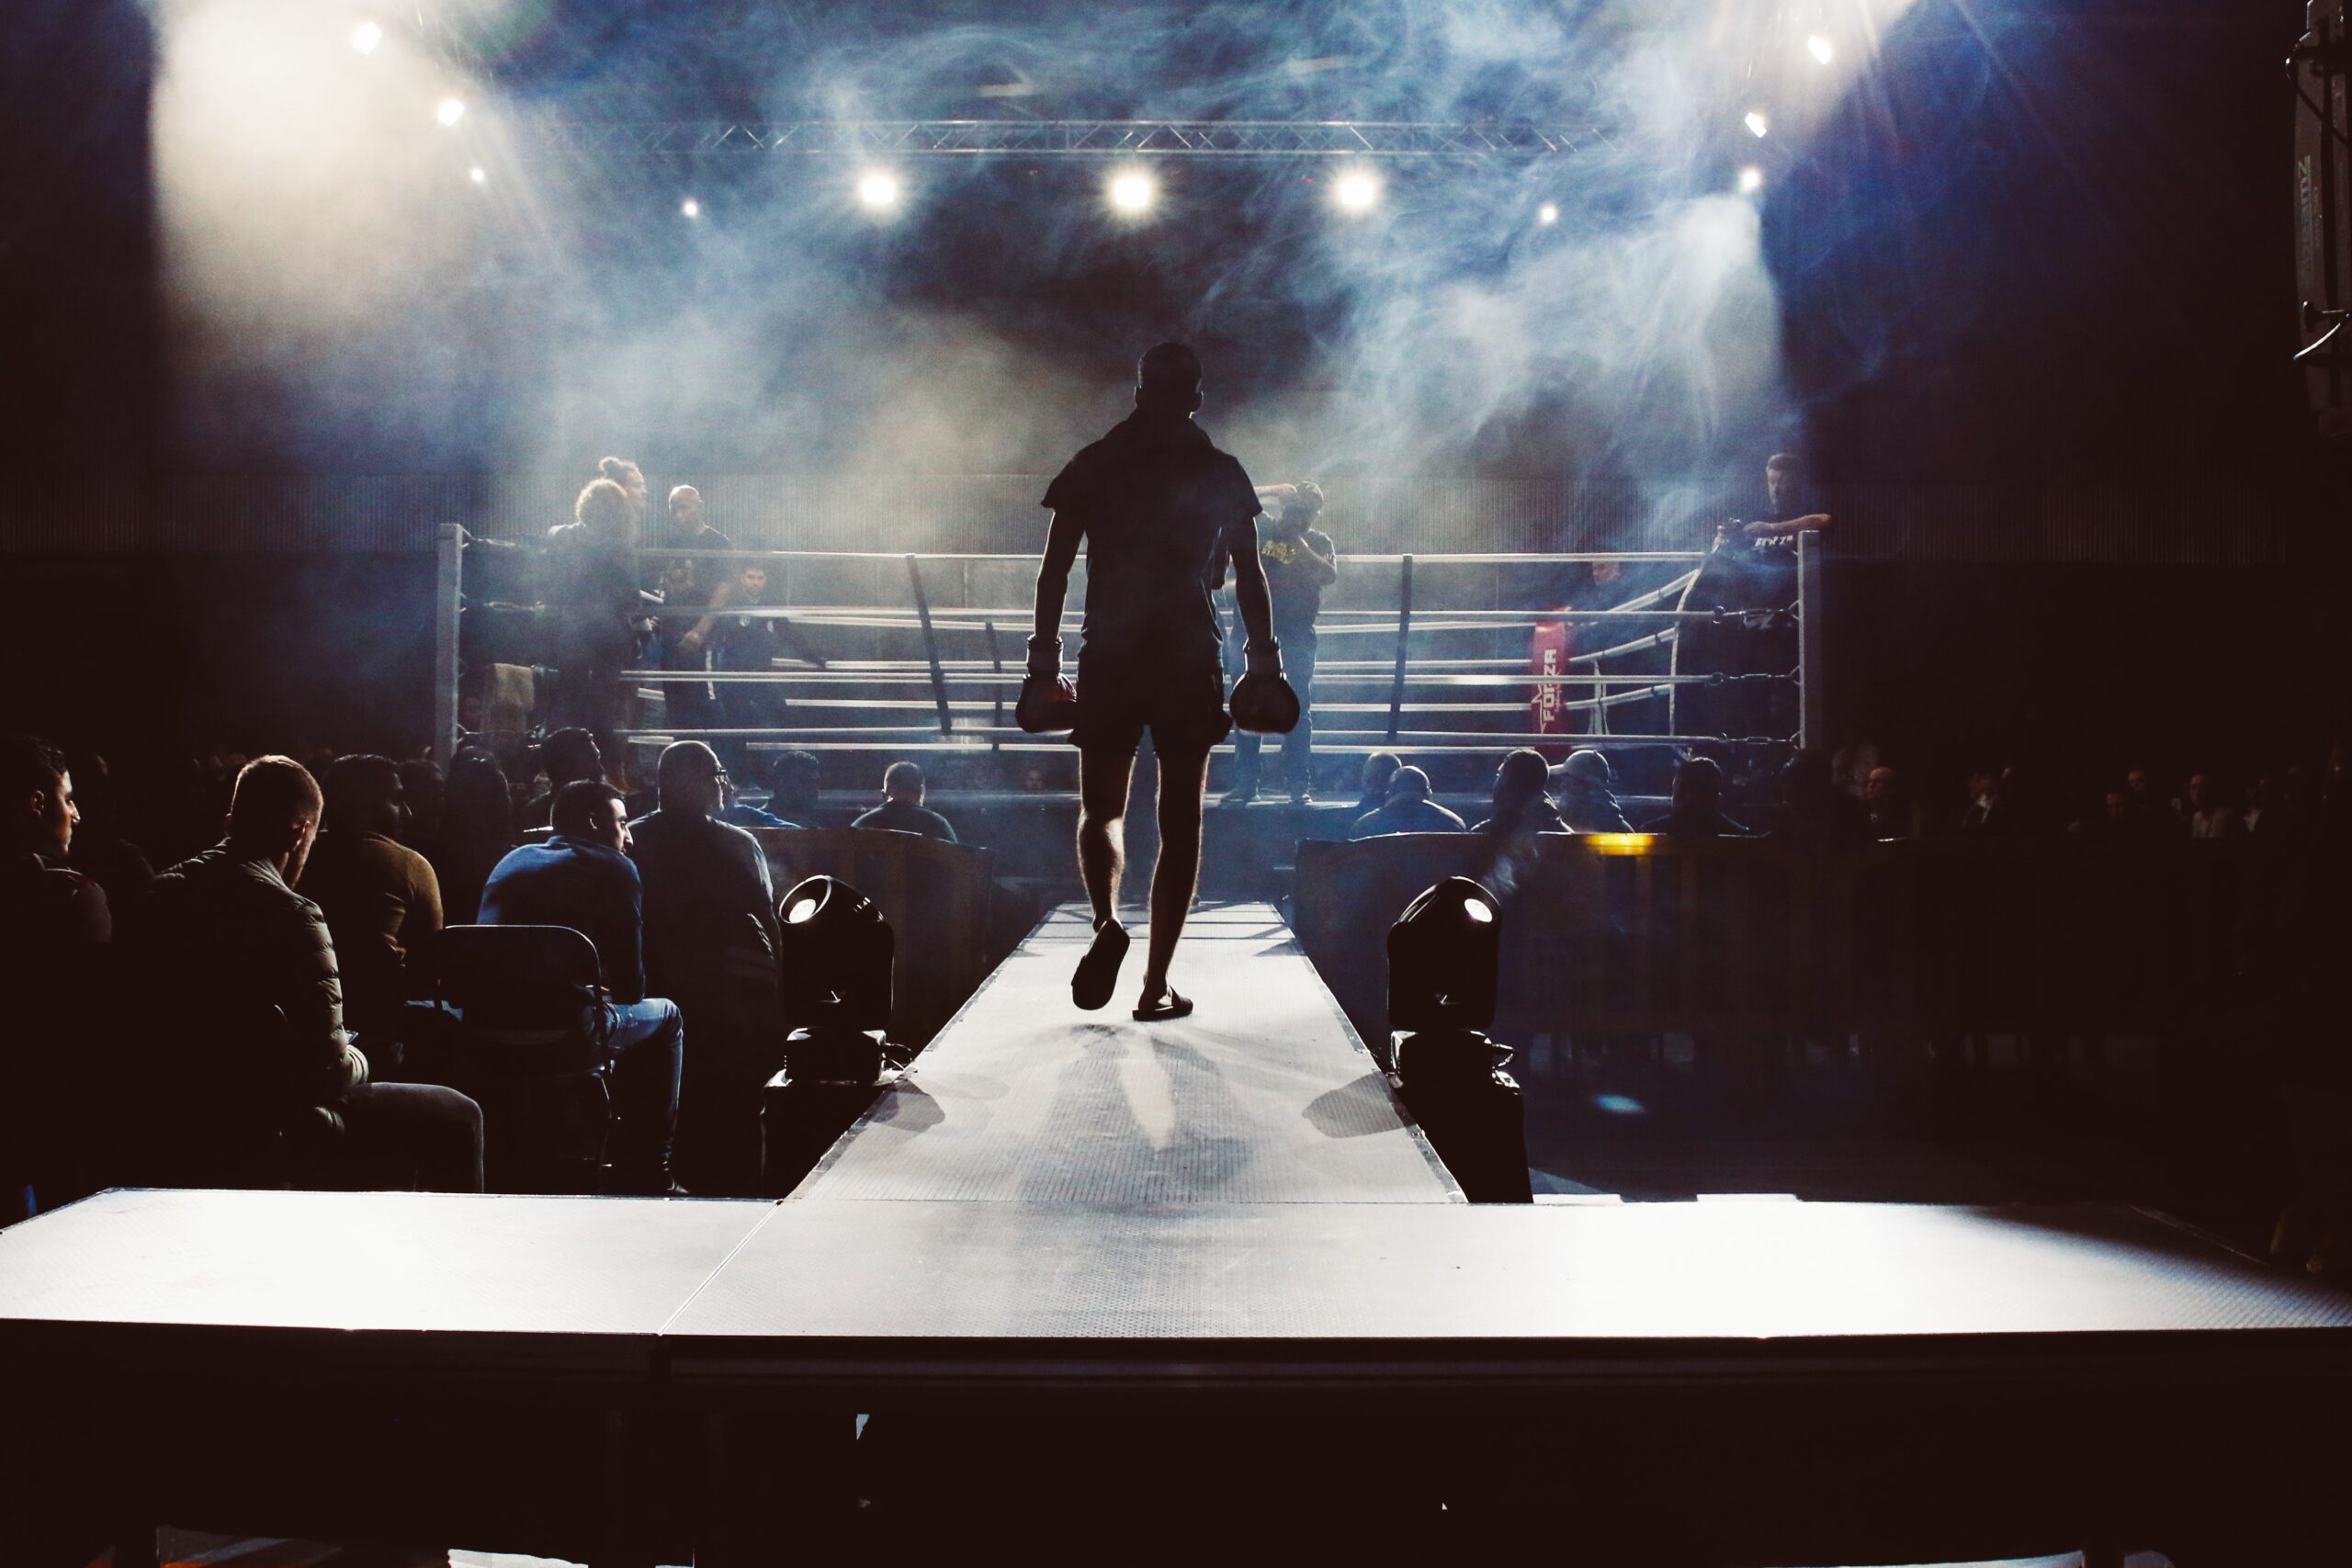 Boxer entering the ring.